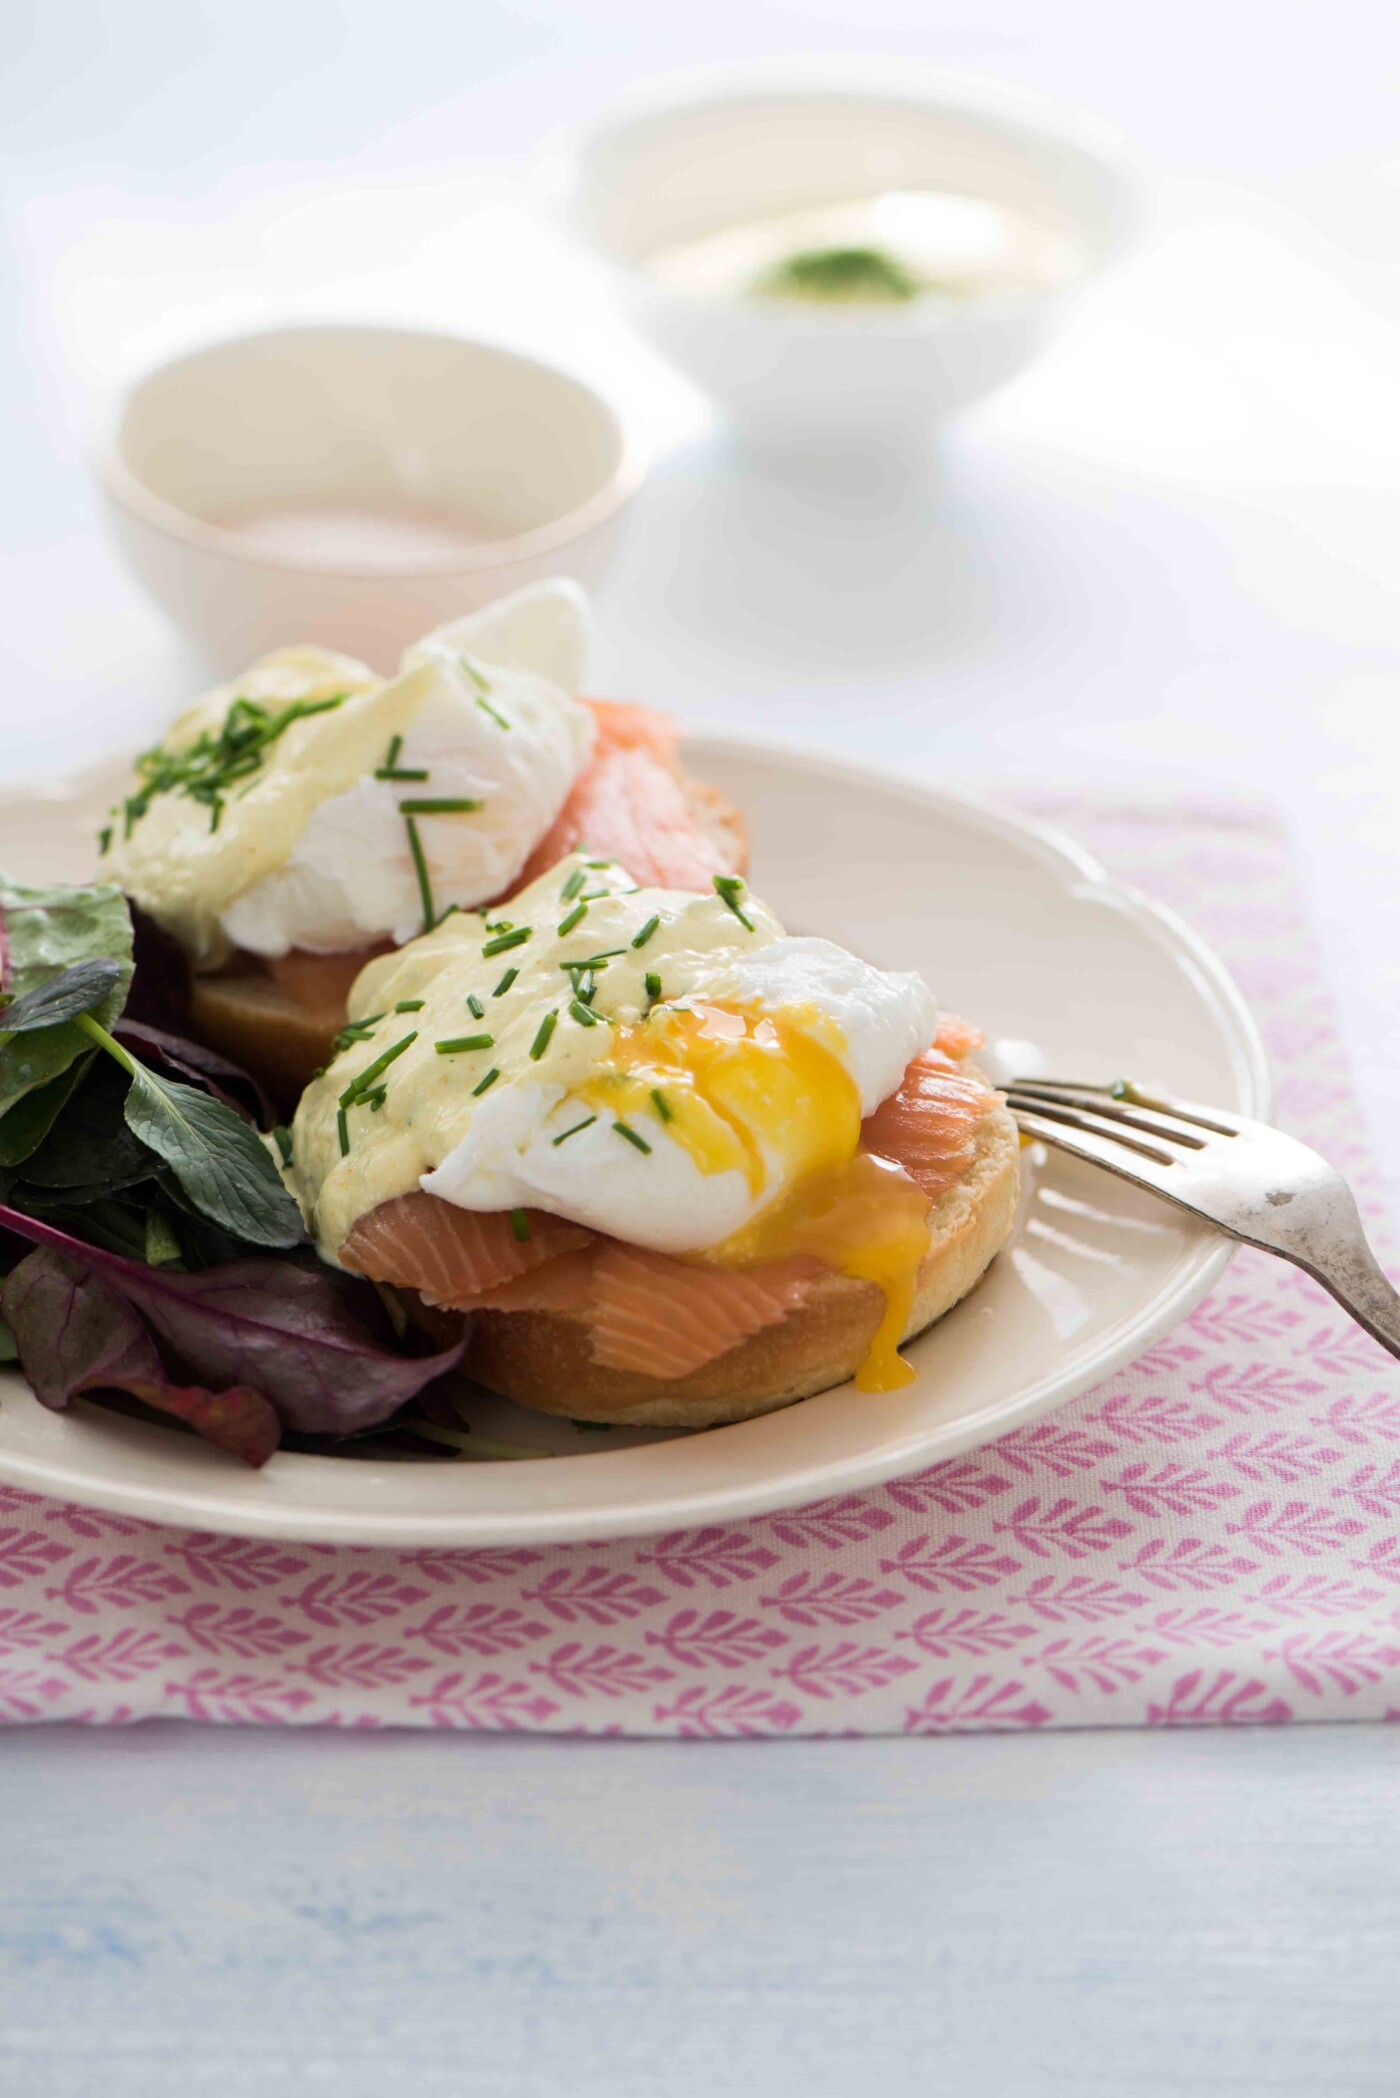 I saw a recipe for a light version of hollandaise made from yoghurt, tumric and horseradish and had to try it with poached eggs and smoked salmon. It came out delicious and totally guilt free.